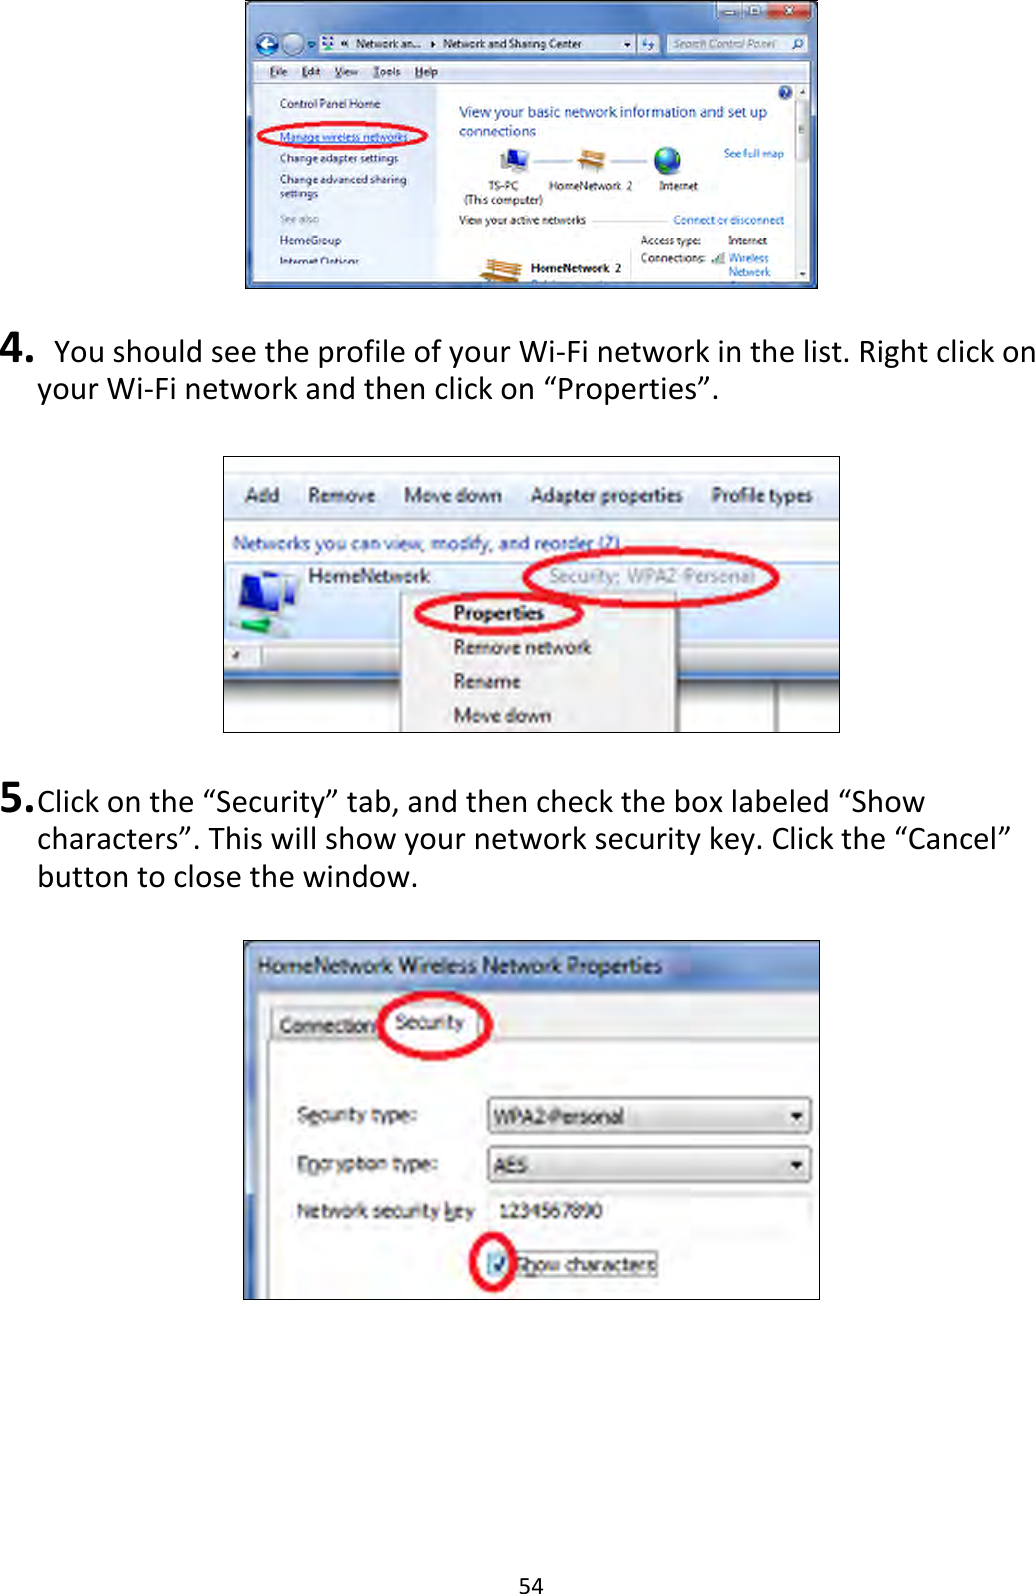 54   4.   You should see the profile of your Wi-Fi network in the list. Right click on your Wi-Fi network and then click on “Properties”.    5. Click on the “Security” tab, and then check the box labeled “Show characters”. This will show your network security key. Click the “Cancel” button to close the window.   